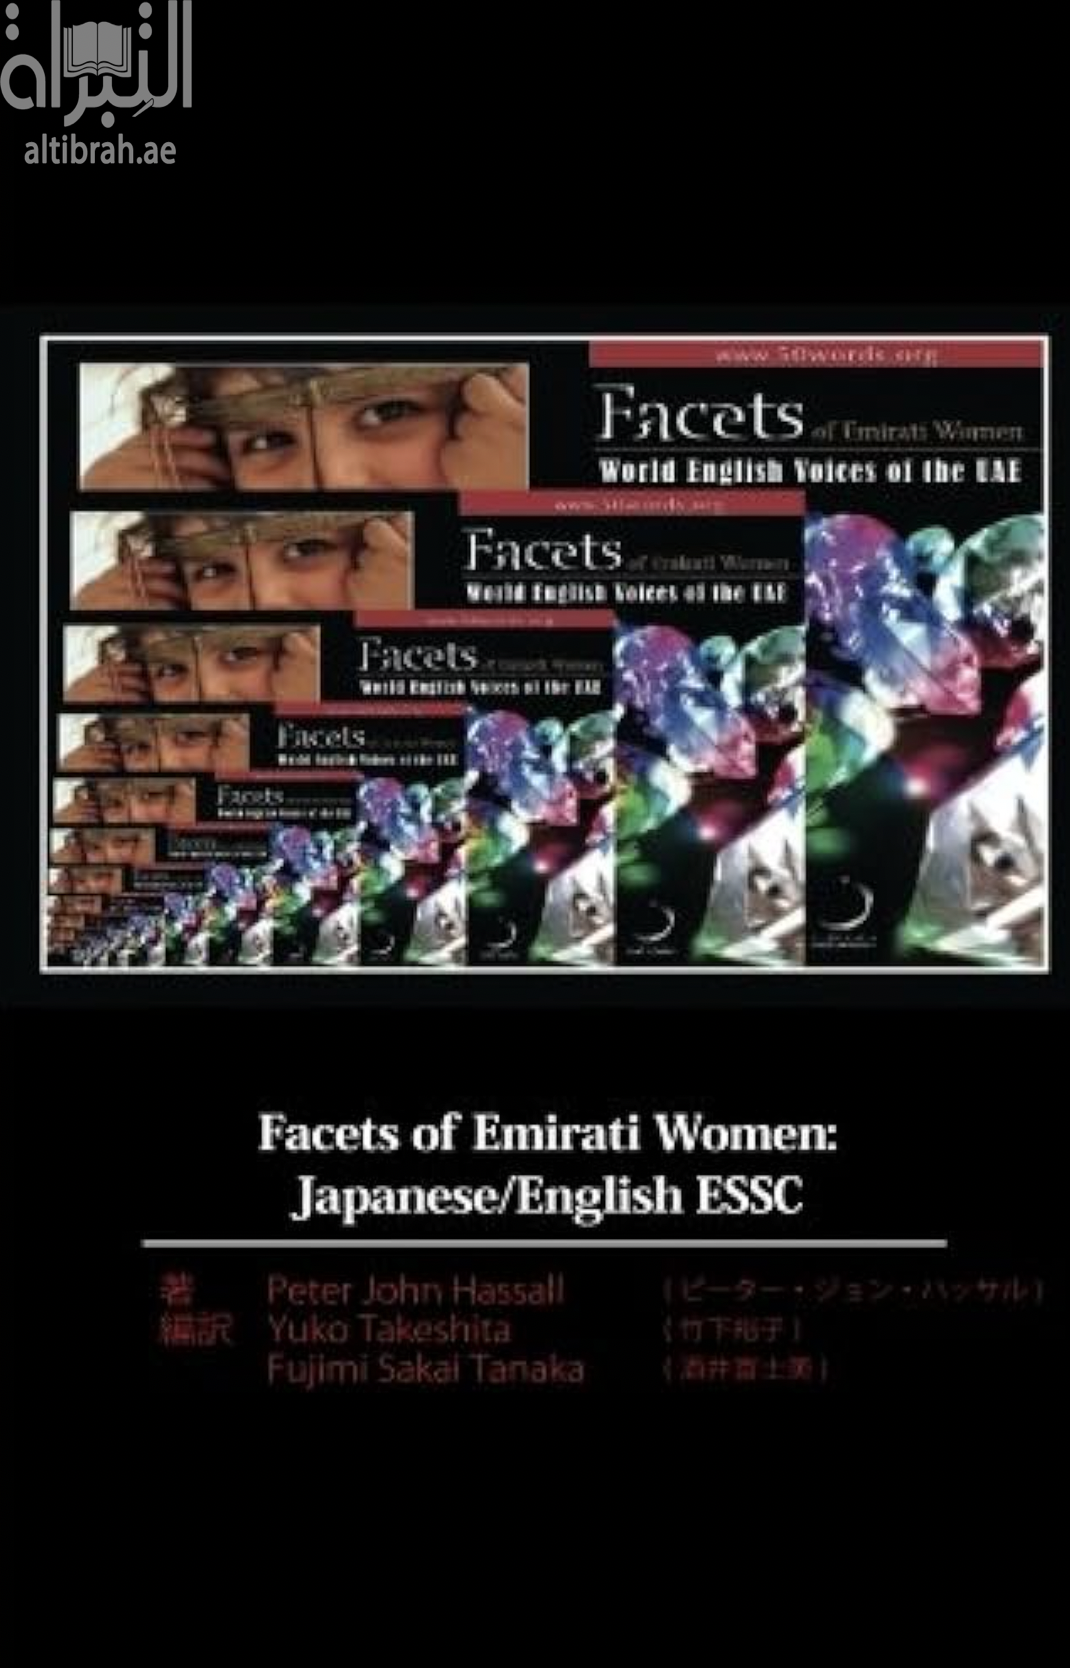 Facets of Emirati Women: World English Voices of the UAE